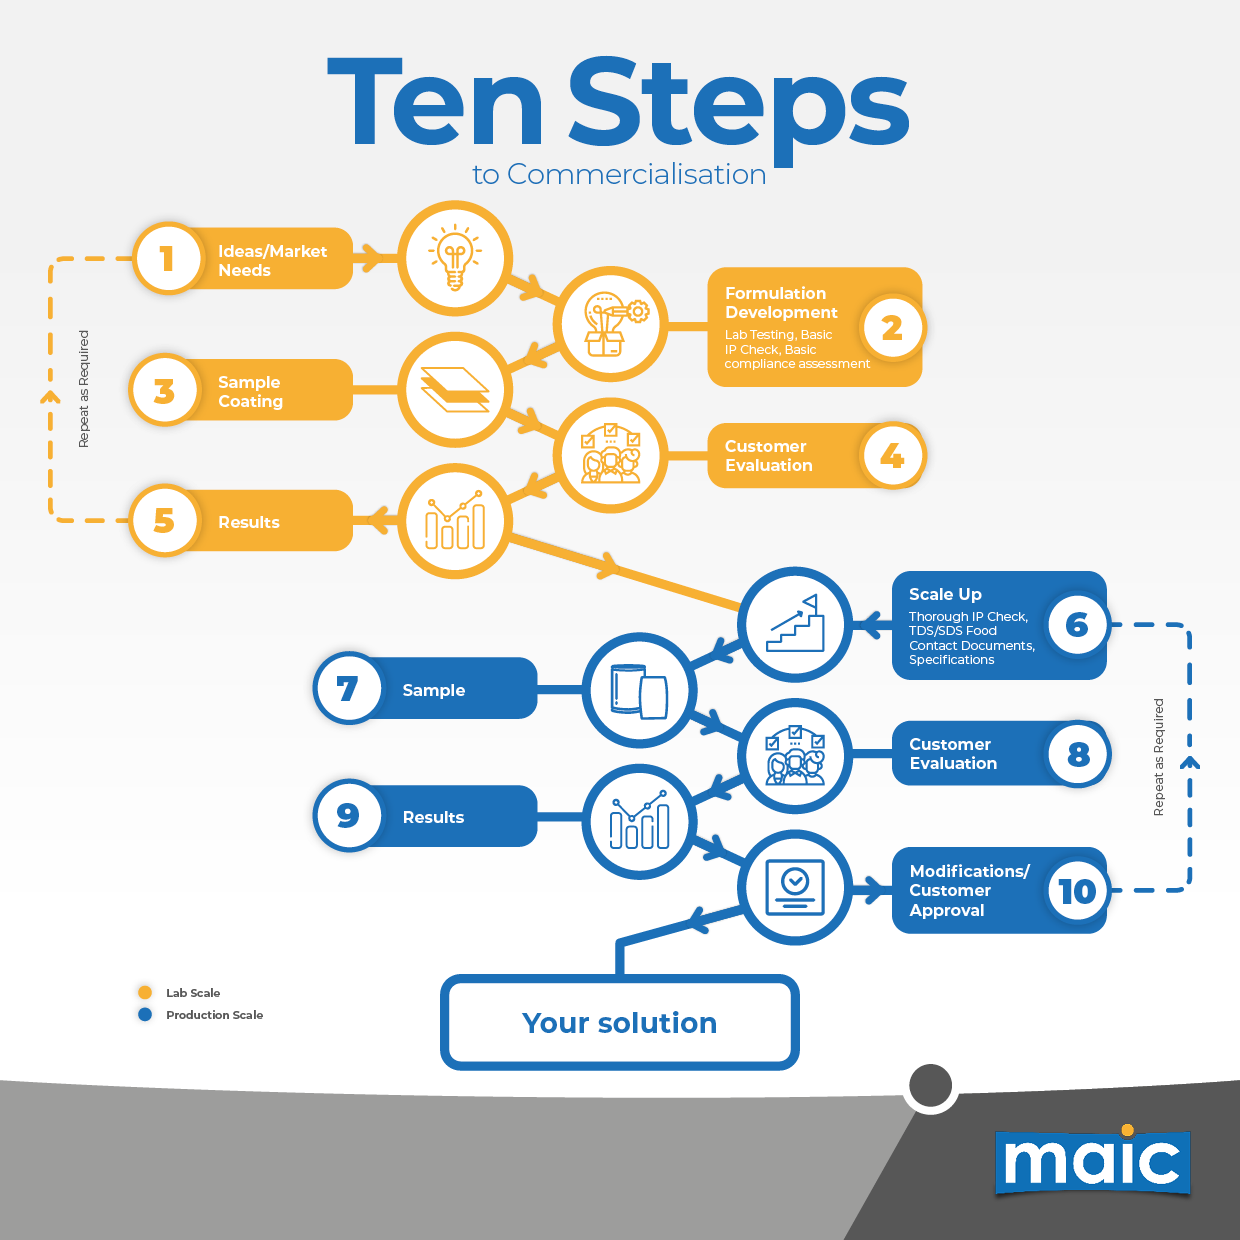 Ten Steps to Commercialisation